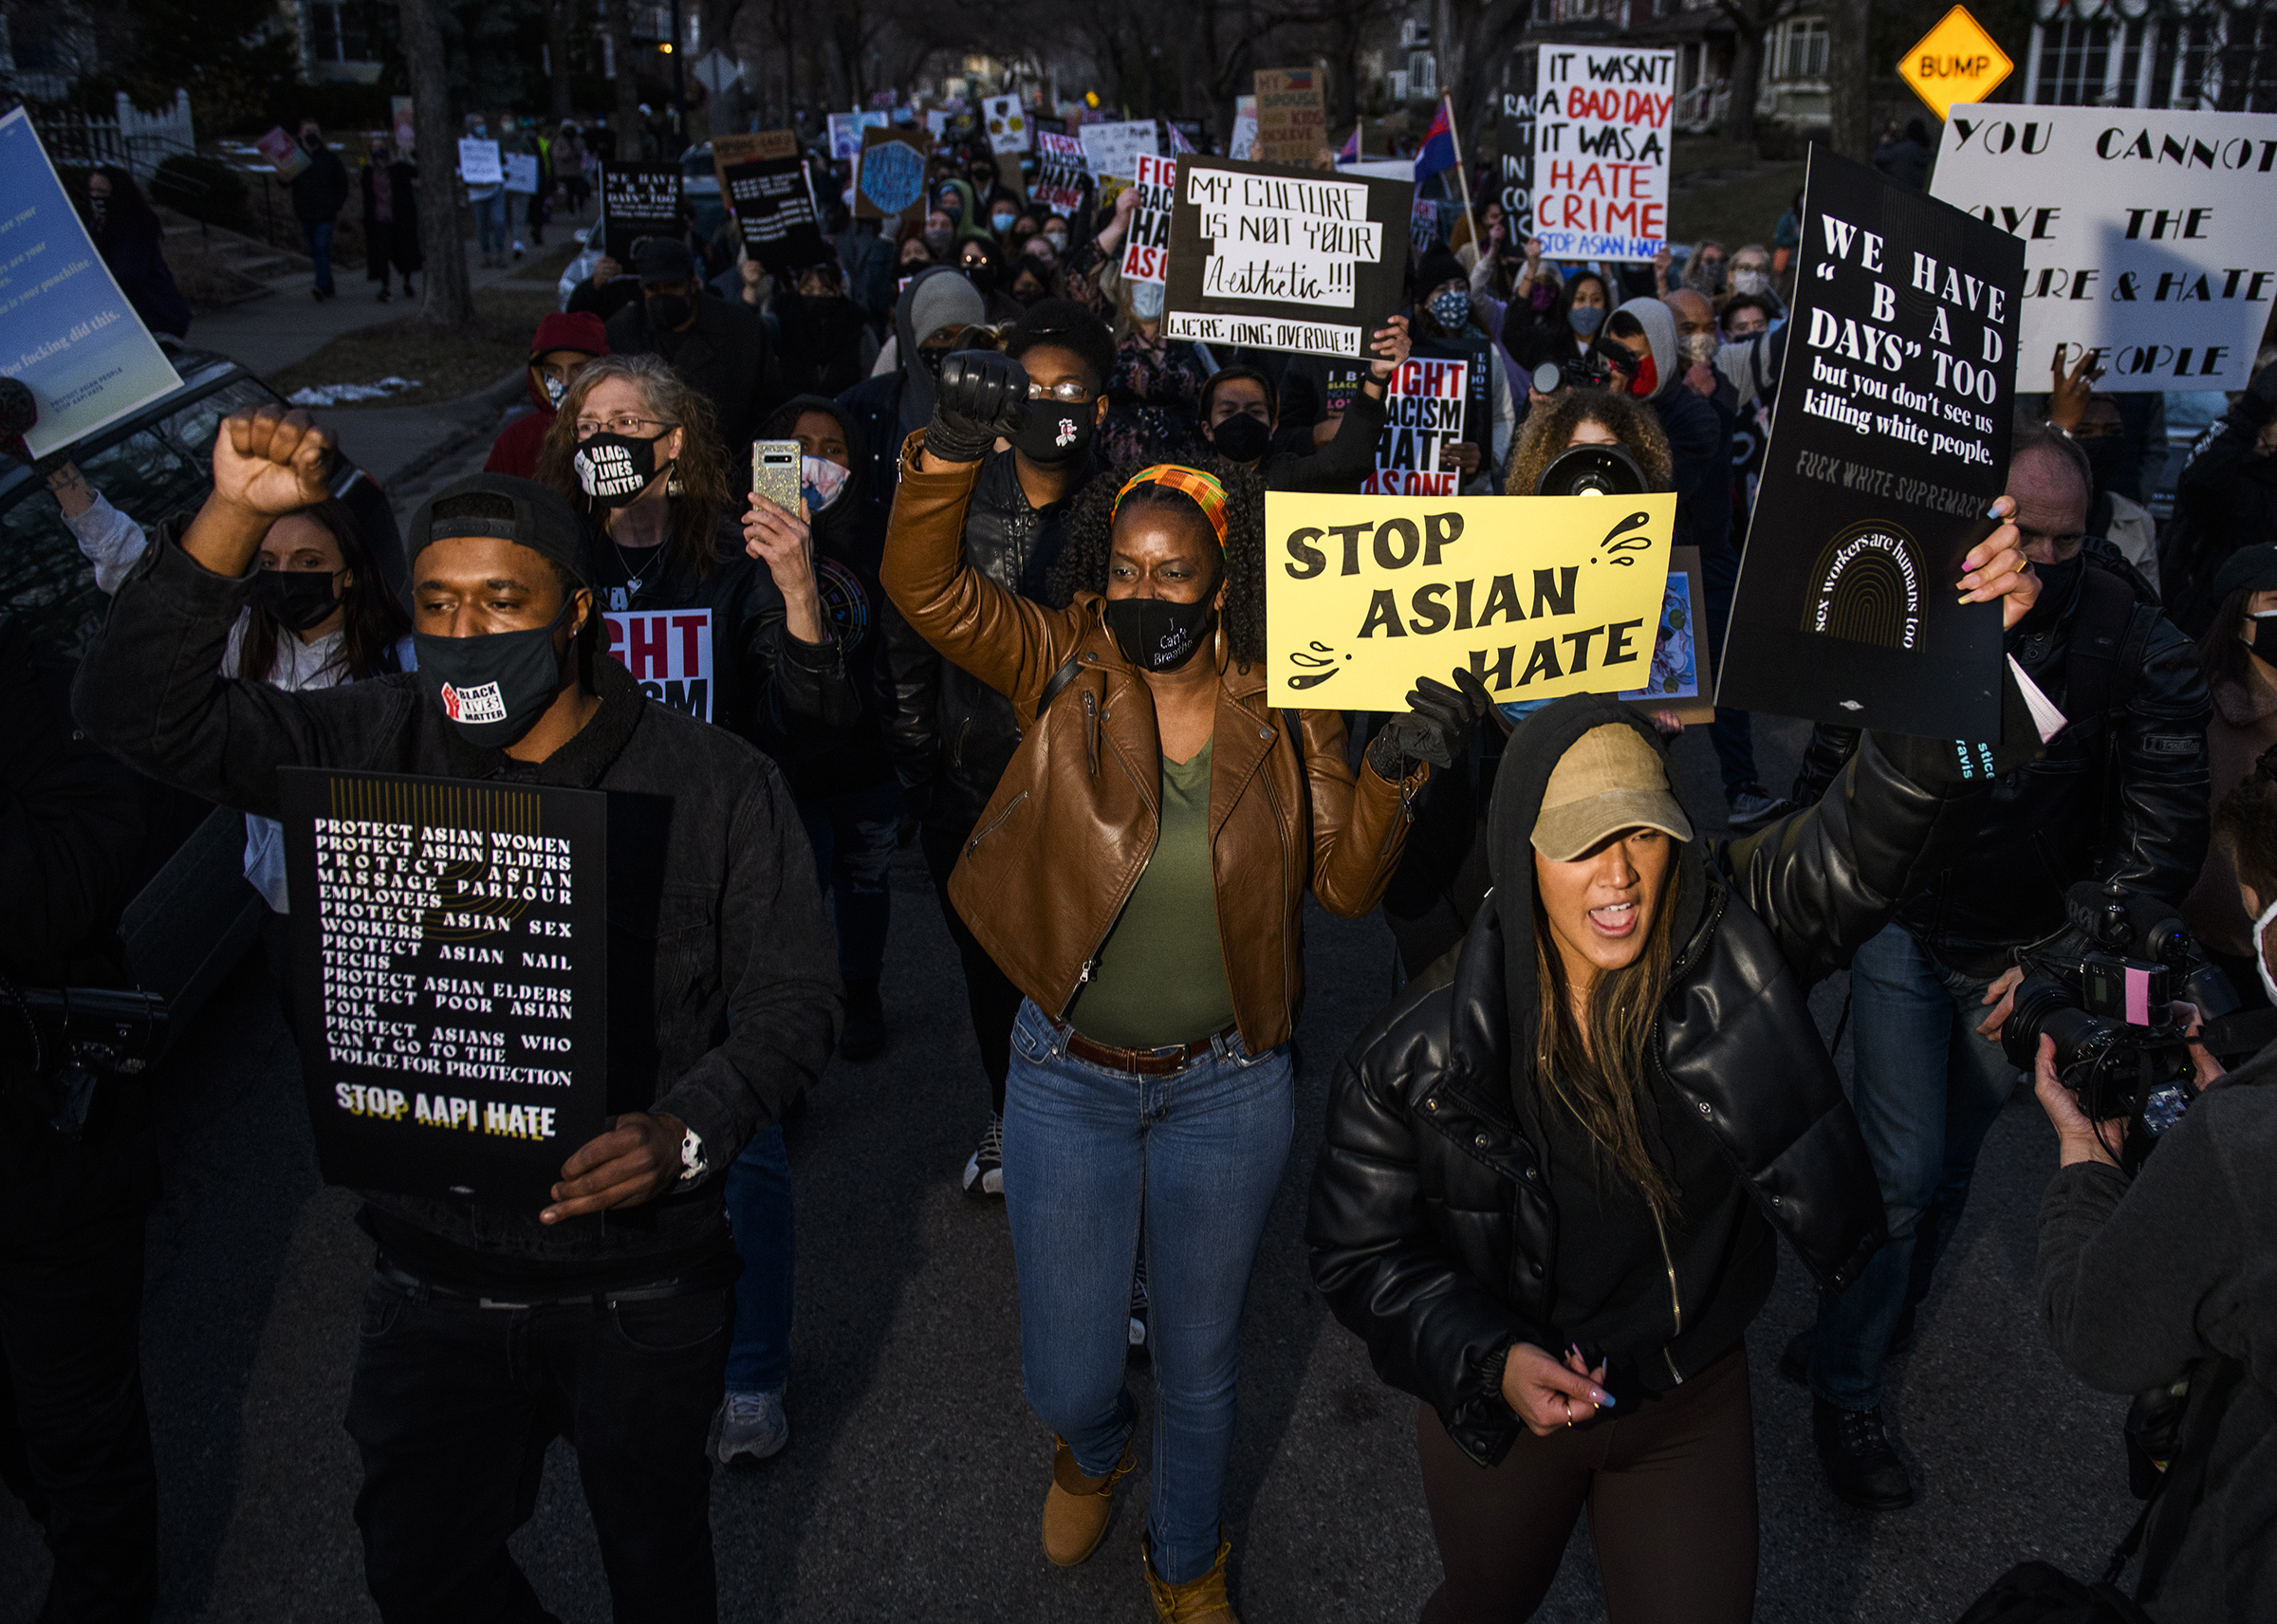 People march through a neighborhood to protest against anti-Asian violence on March 18 in Minneapolis